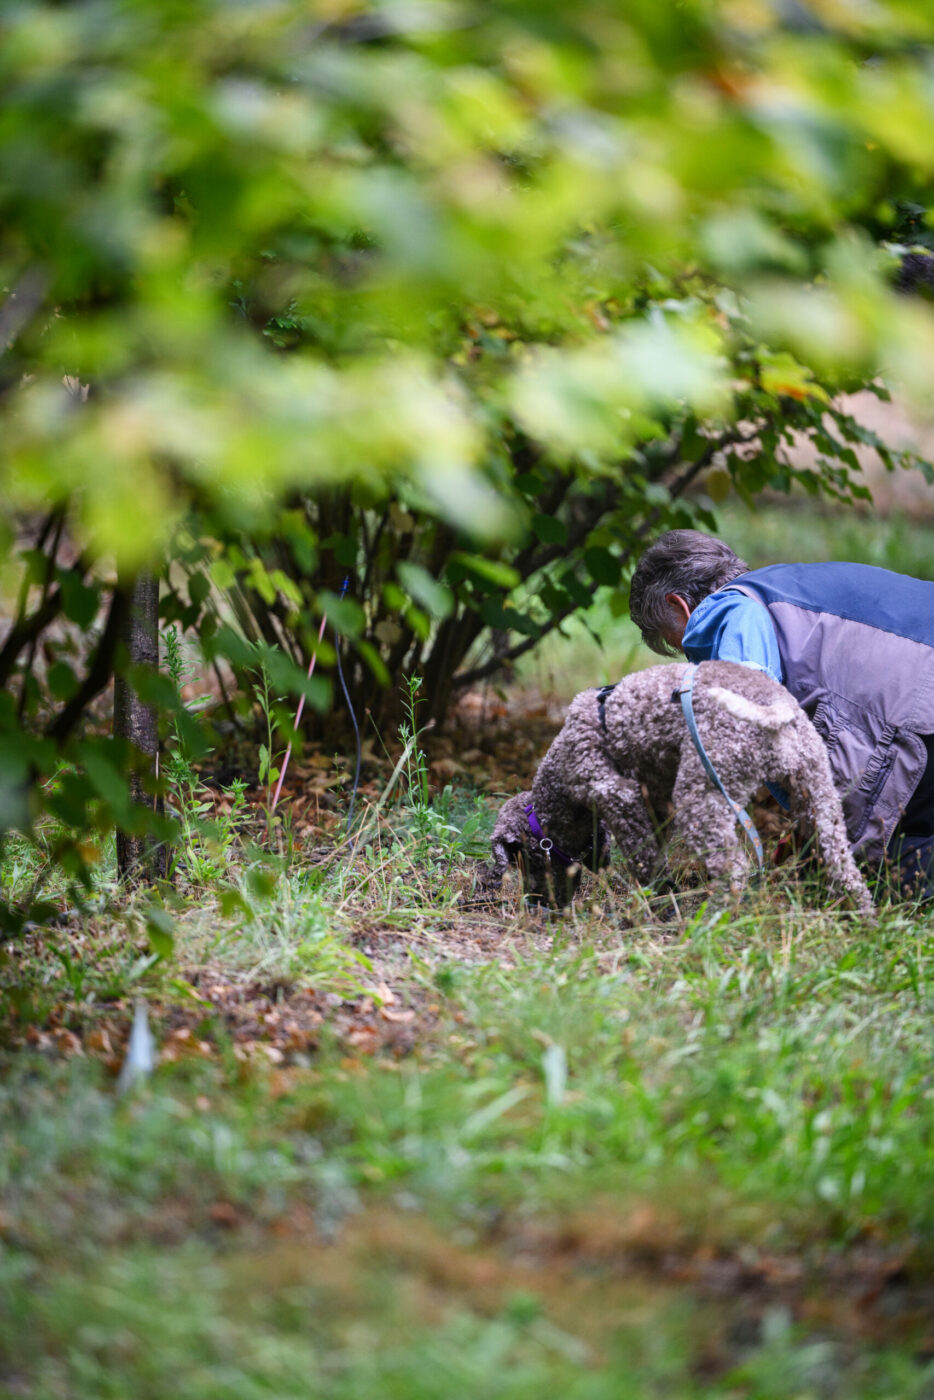 Karen Passafaro, president of the North American Truffle Growers Association, and her dog, Alba, hunt for Burgundy truffles on her family property outside Santa Rosa. Passafaro and Alba found their first and only cultivated truffle on the property in June 2022. 